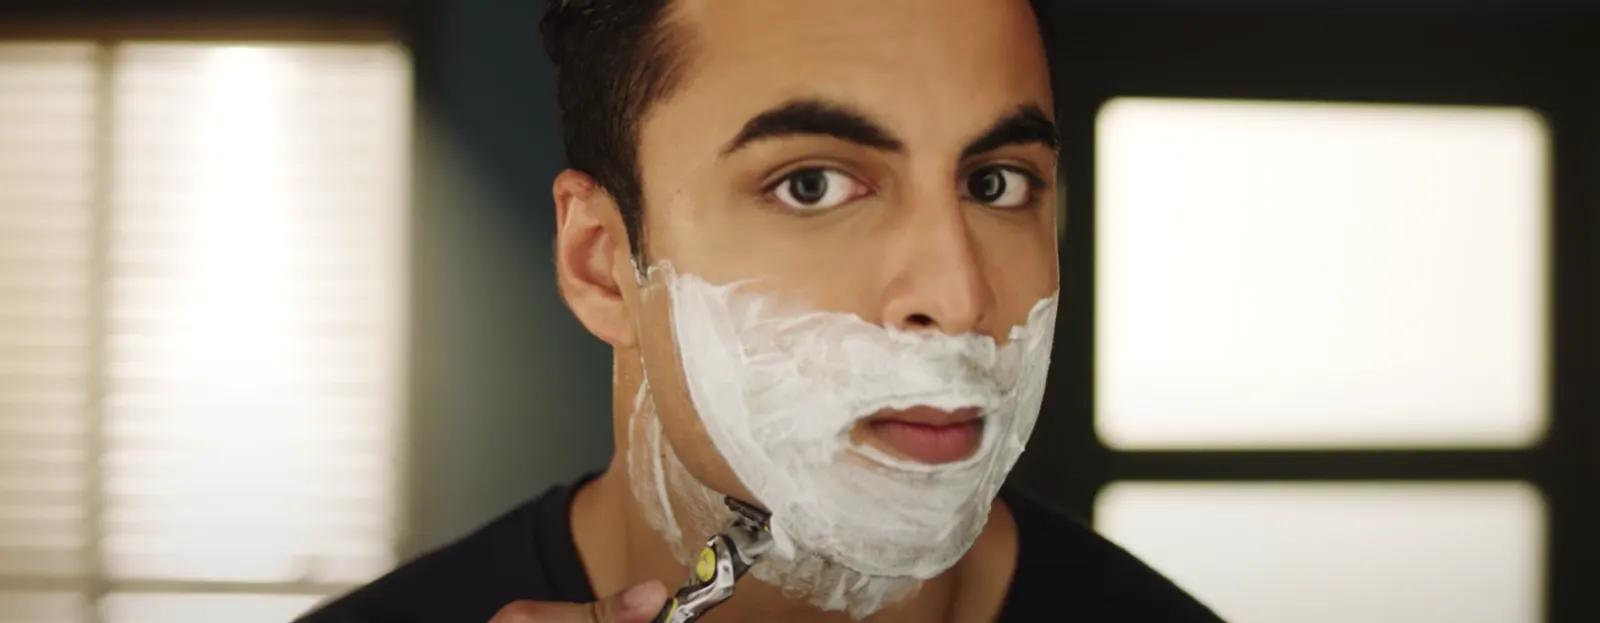 How to Shave Your Face